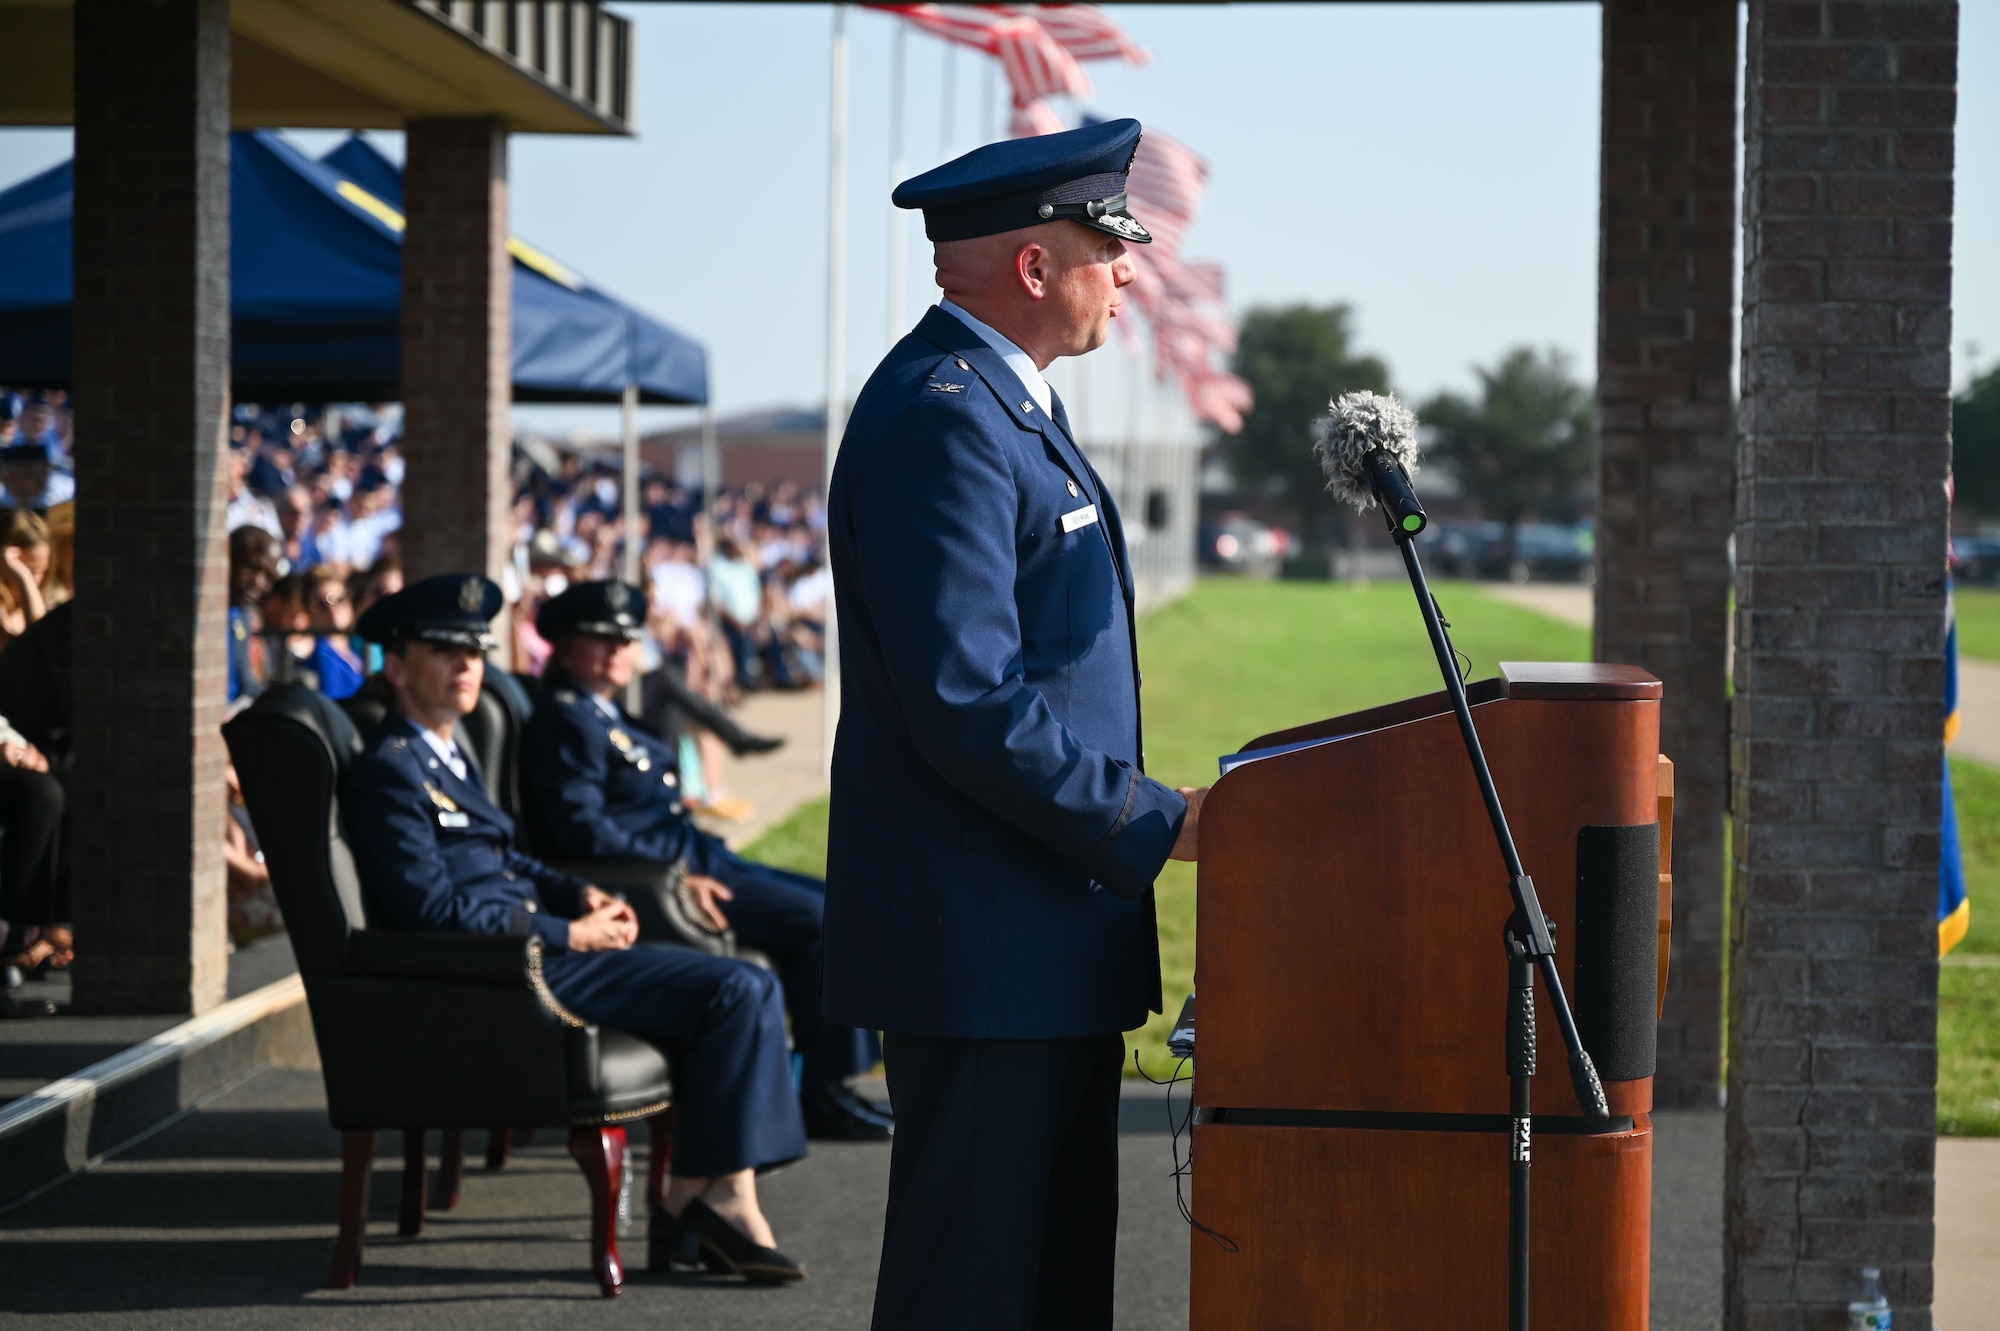 U.S. Air Force Col. Matthew Reilman, 17th Training Wing outgoing commander, speaks during the 17th TRW change of command ceremony at Goodfellow Air Force Base, Texas, June 16, 2023. The change of command ceremony is a military tradition, which illustrates the formal transfer of authority by the passing of the guidon from departing commander to incoming commander. (U.S. Air Force photo by Senior Airman Sarah Williams)